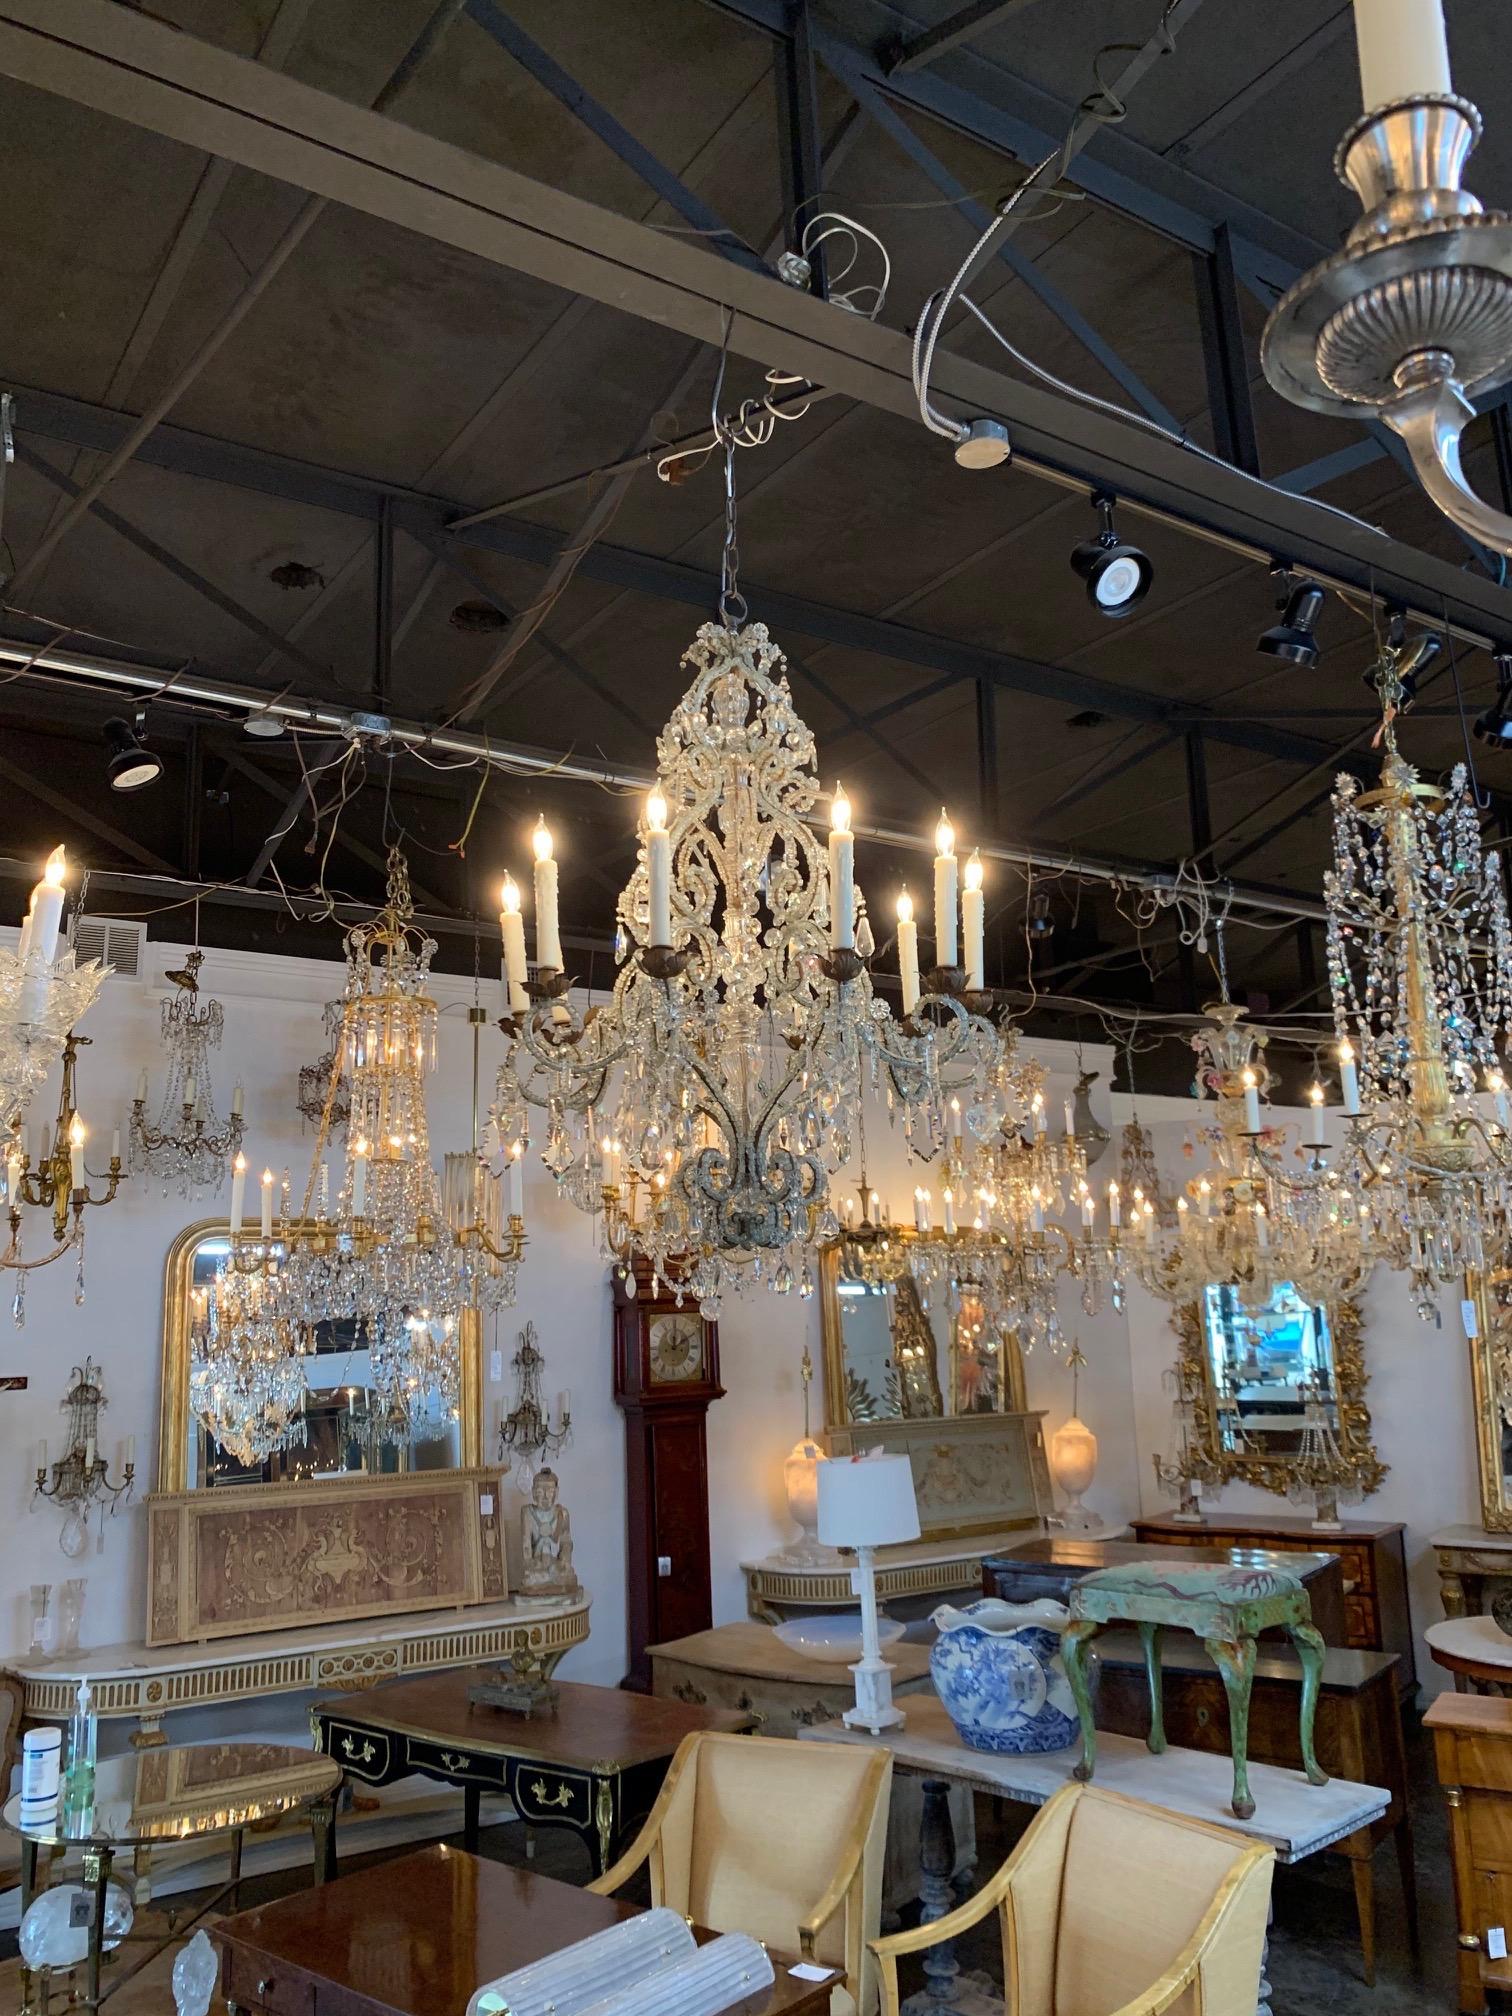 Elegant 19th century Italian beaded crystal chandelier with 10 lights. Beautiful curved base covered in beads and lovely dangling crystals. Stunning!